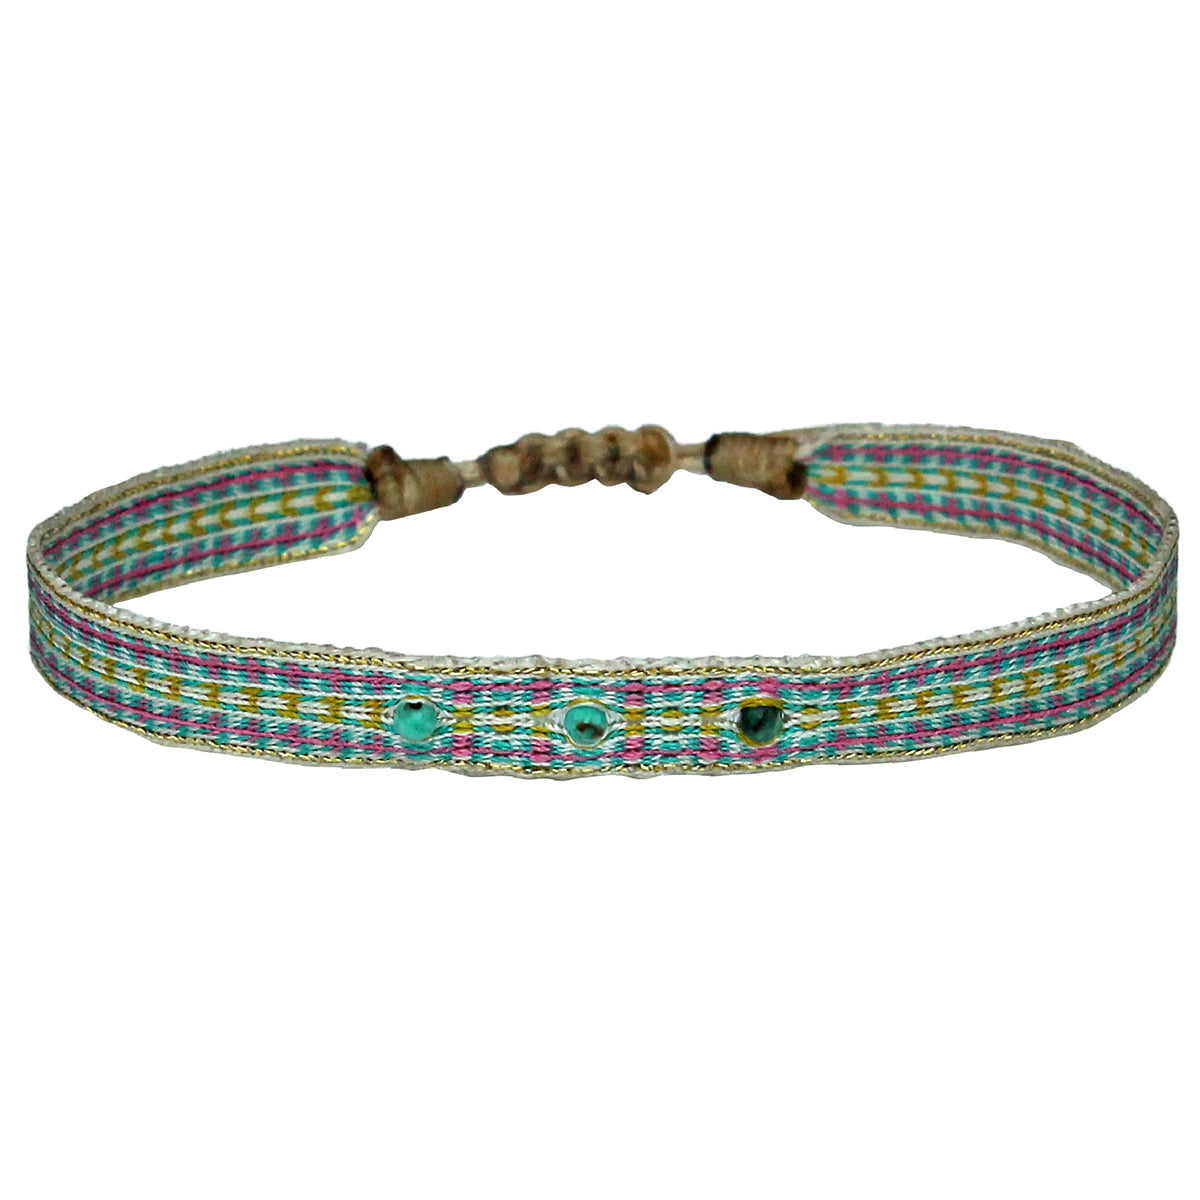 HANDWOVEN BRACELET WITH FEATURING THREE TURQUOISE STONES